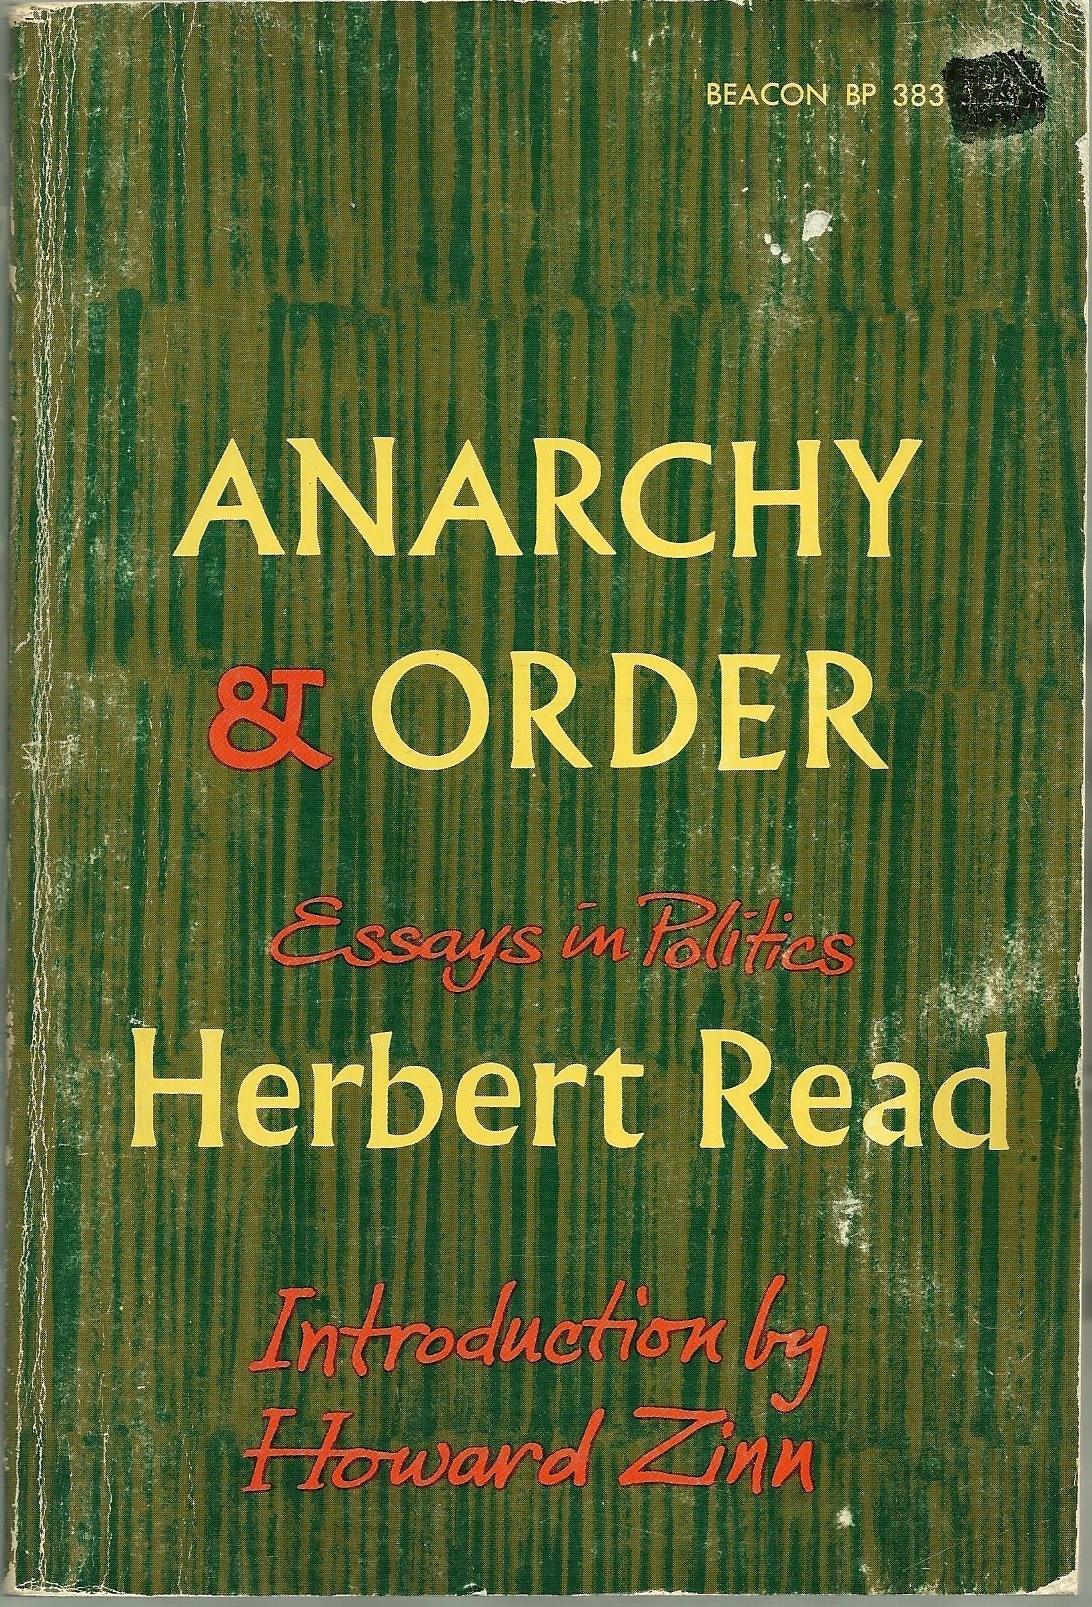 Anarchy and Order: Essays in Politics